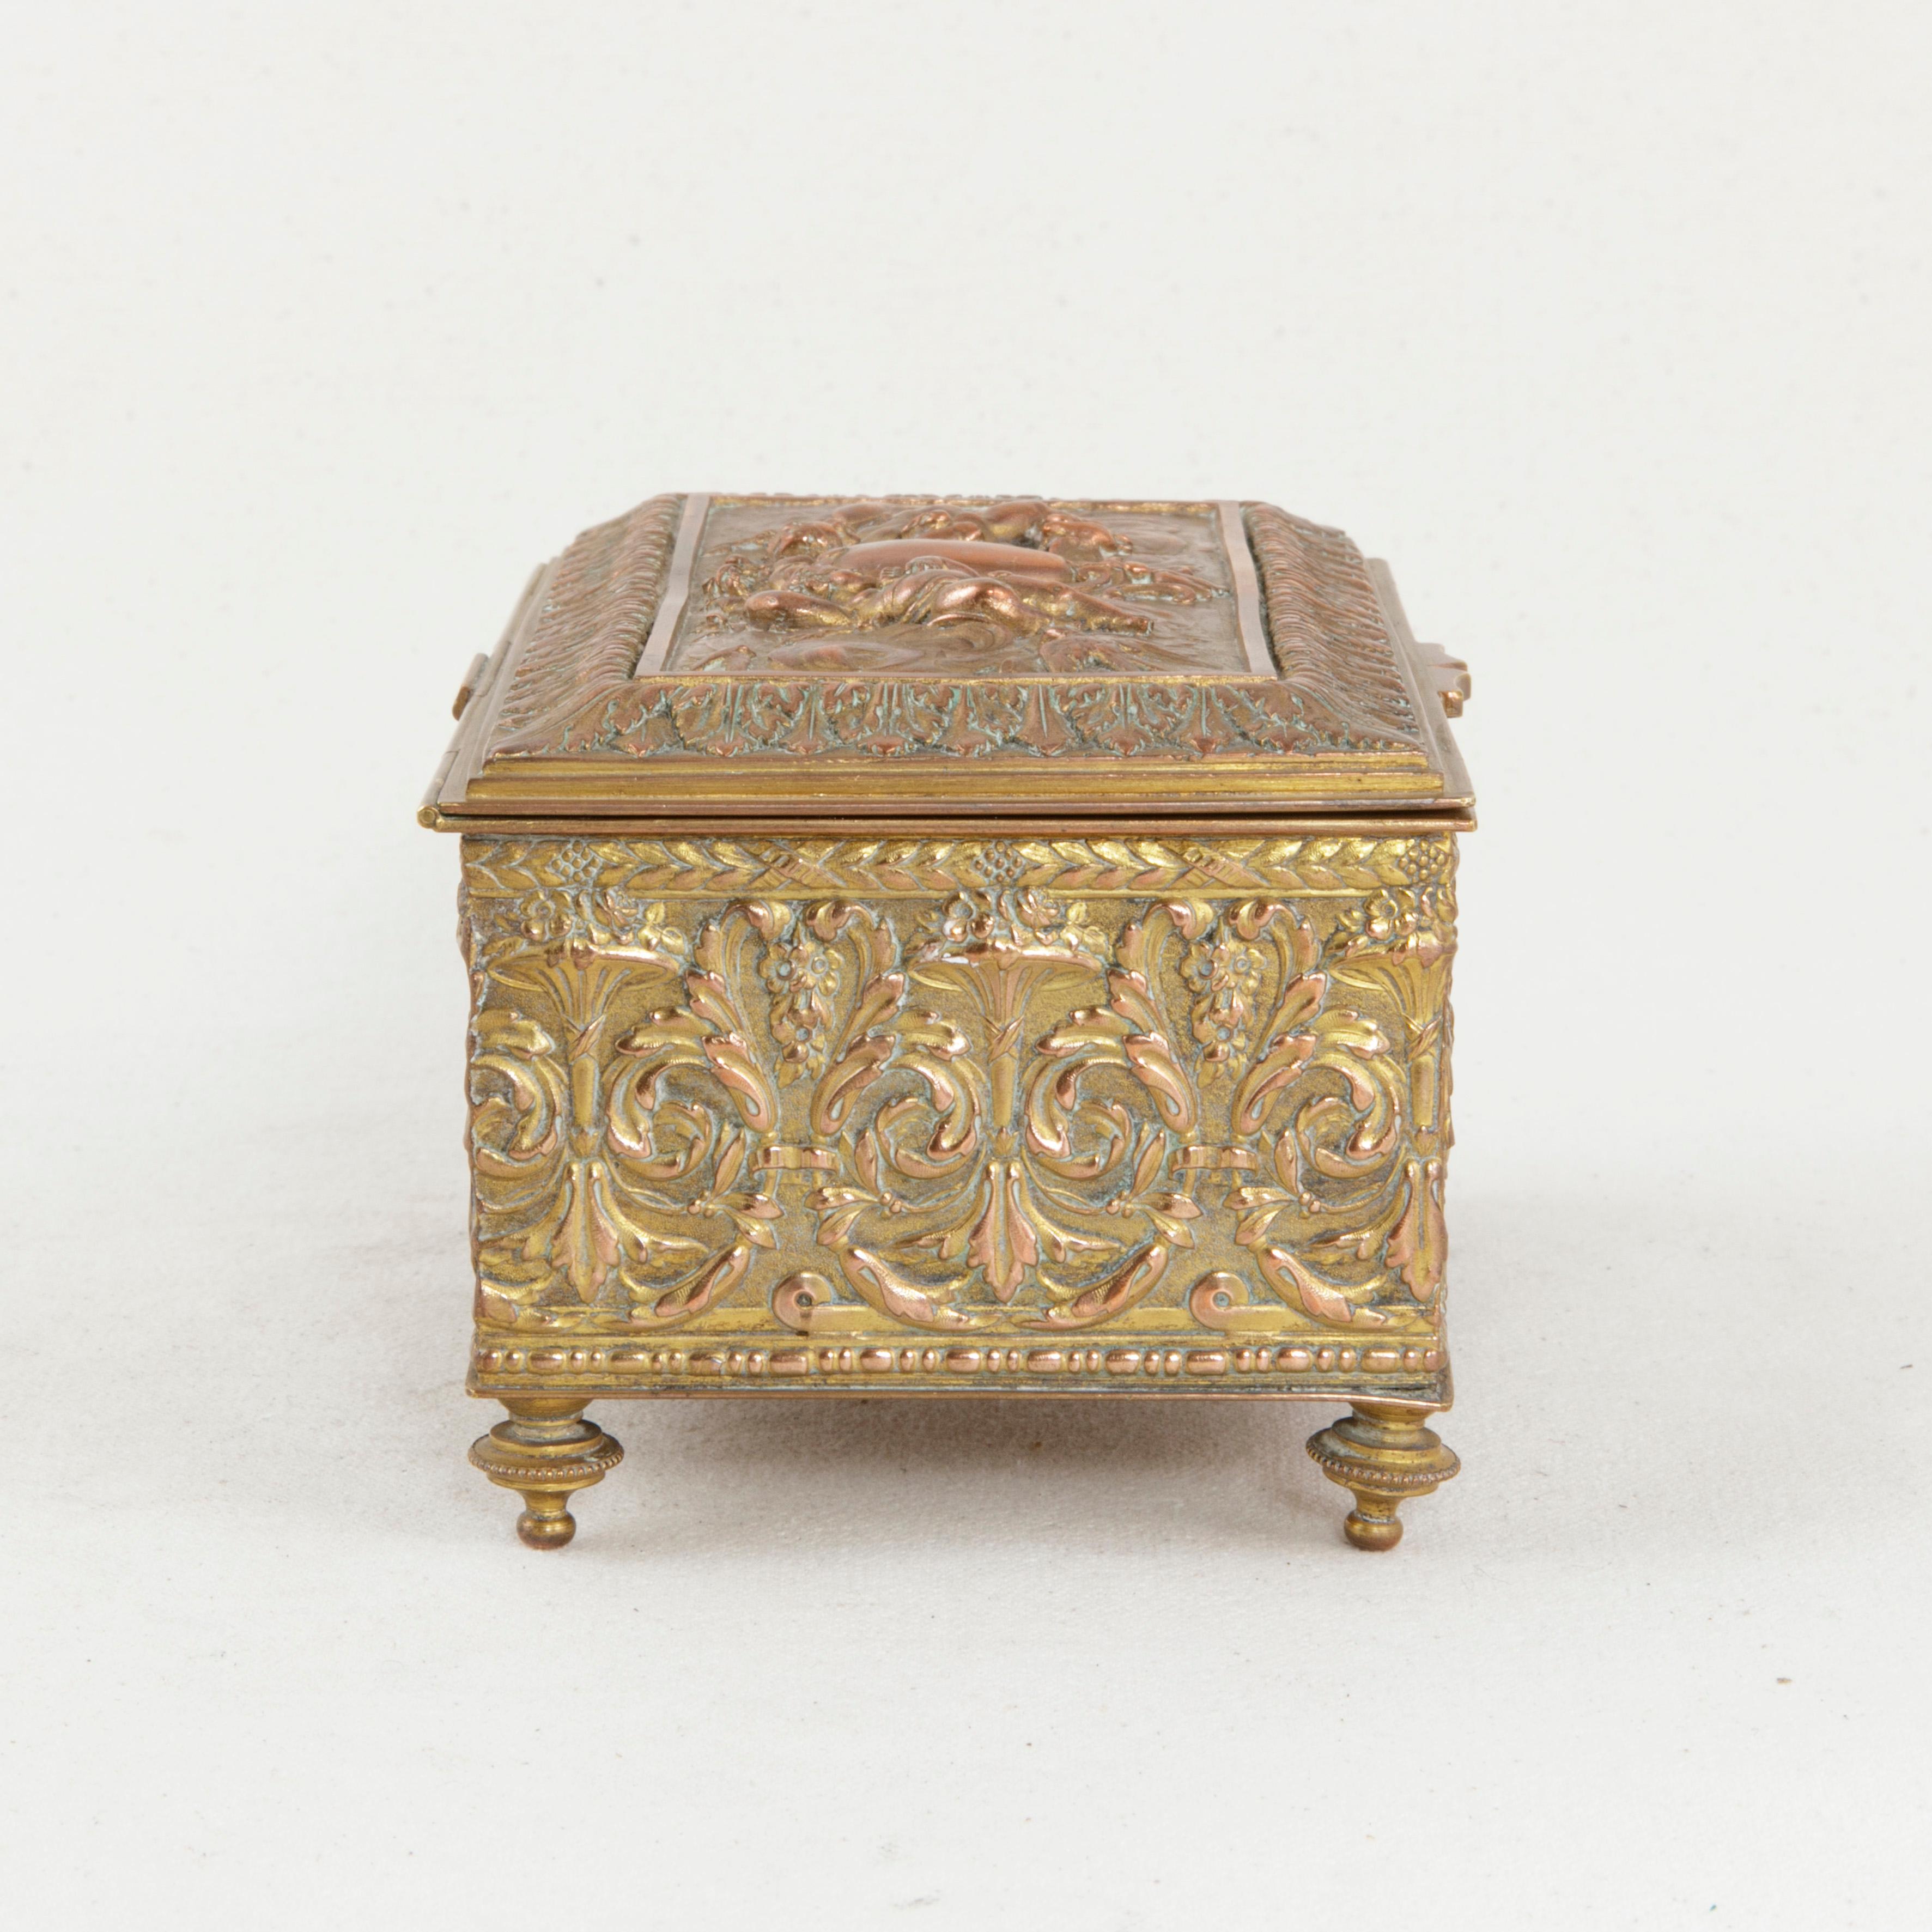 French Copper Repousse Box with Lid, Cherubs and Floral Motif, circa 1900 (Frühes 20. Jahrhundert)